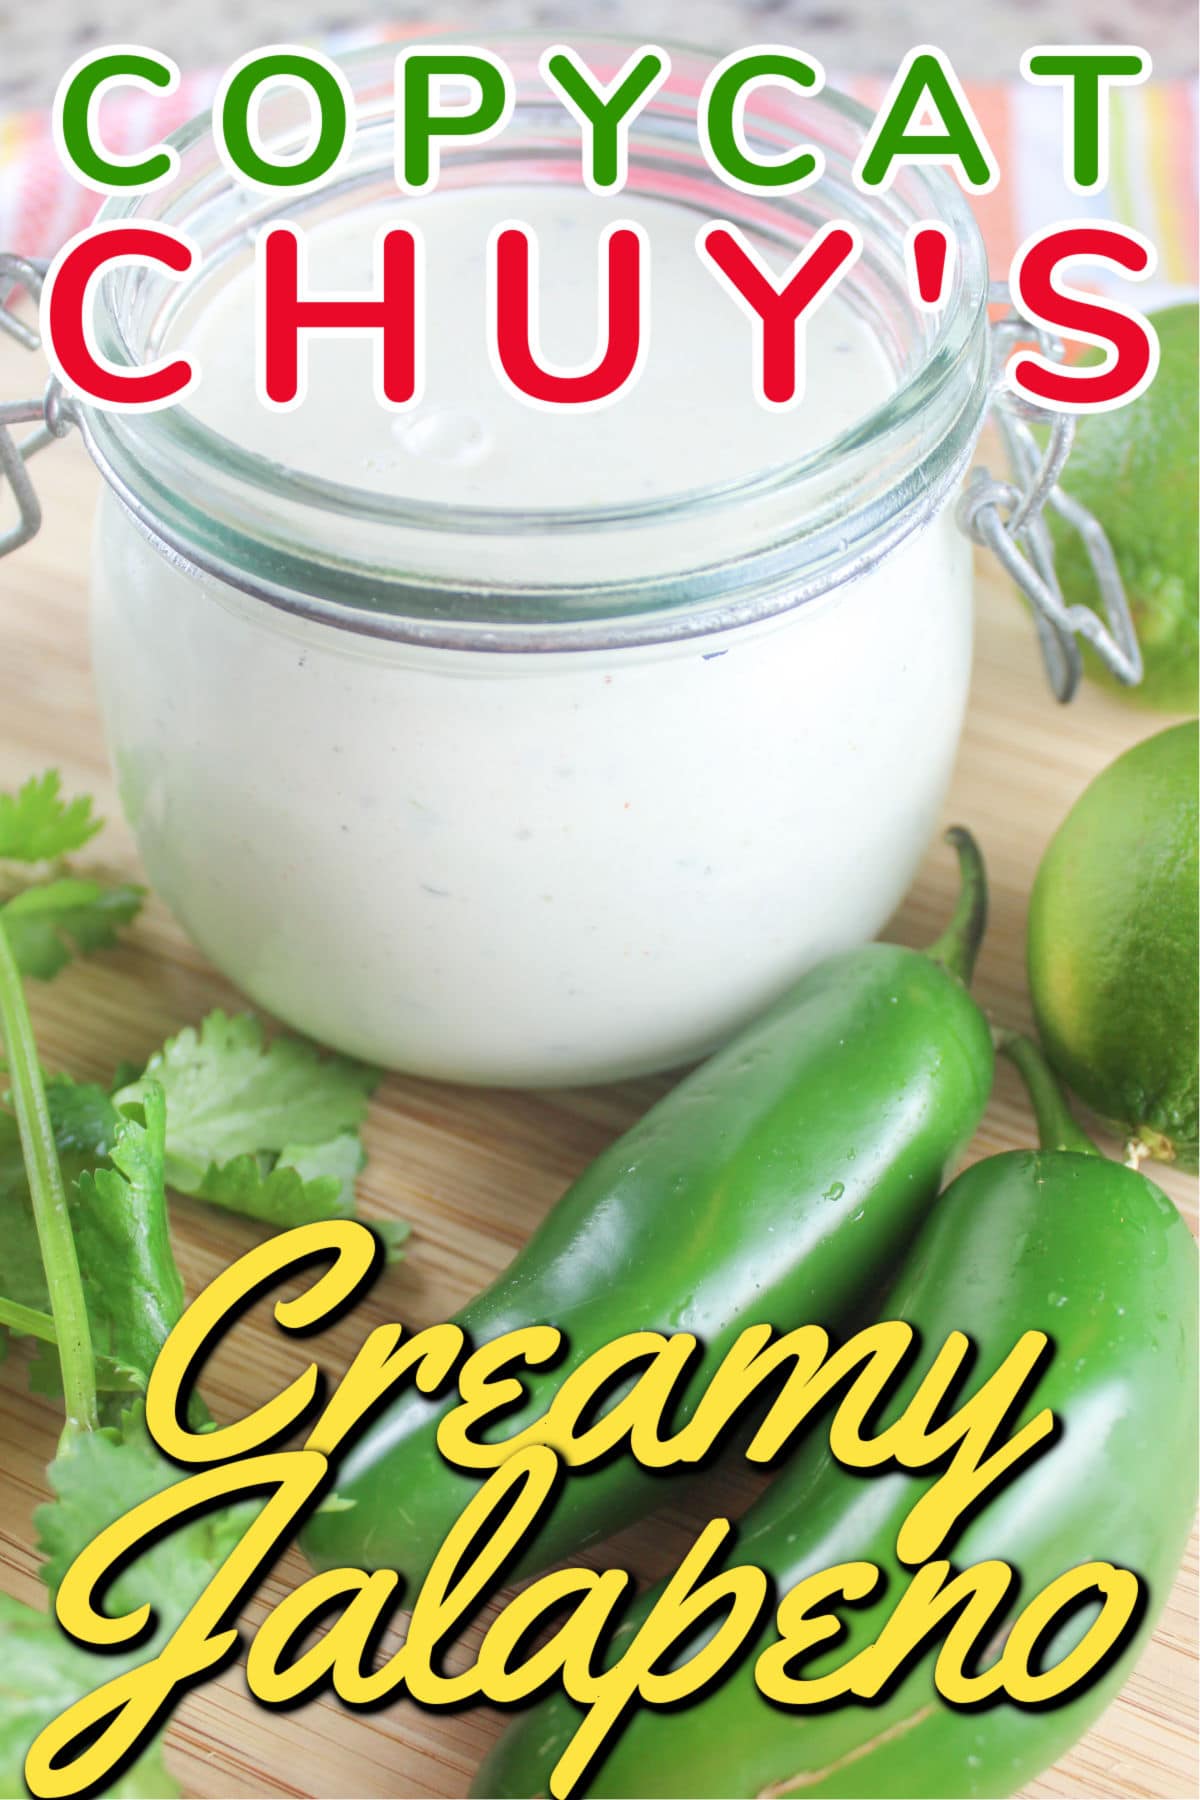 This Copycat Chuy's Creamy Jalapeno Ranch recipe is ready in 5 minutes and is so much better than anything out of a bottle! Chuy's is one of my favorite spots for dining out. I tried their Creamy Jalapeno Ranch and HAD to come home and make it for myself! via @foodhussy